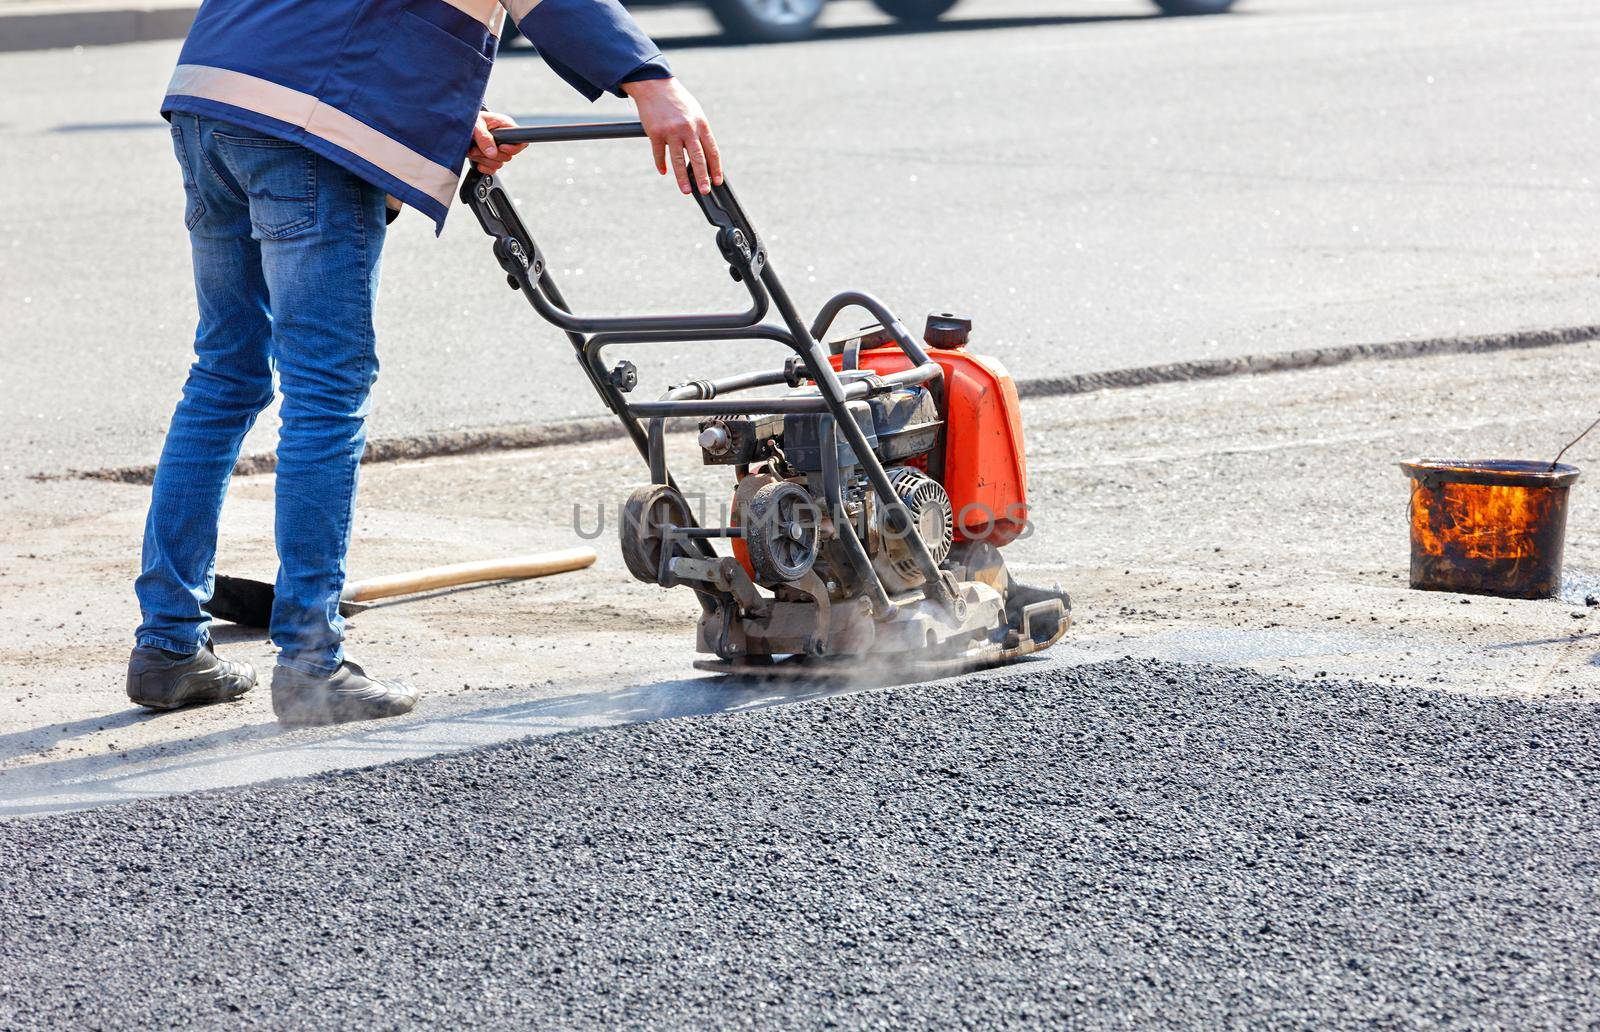 A road service worker compacts the asphalt on a fenced road section of the roadway with a petrol vibration plate compactor.